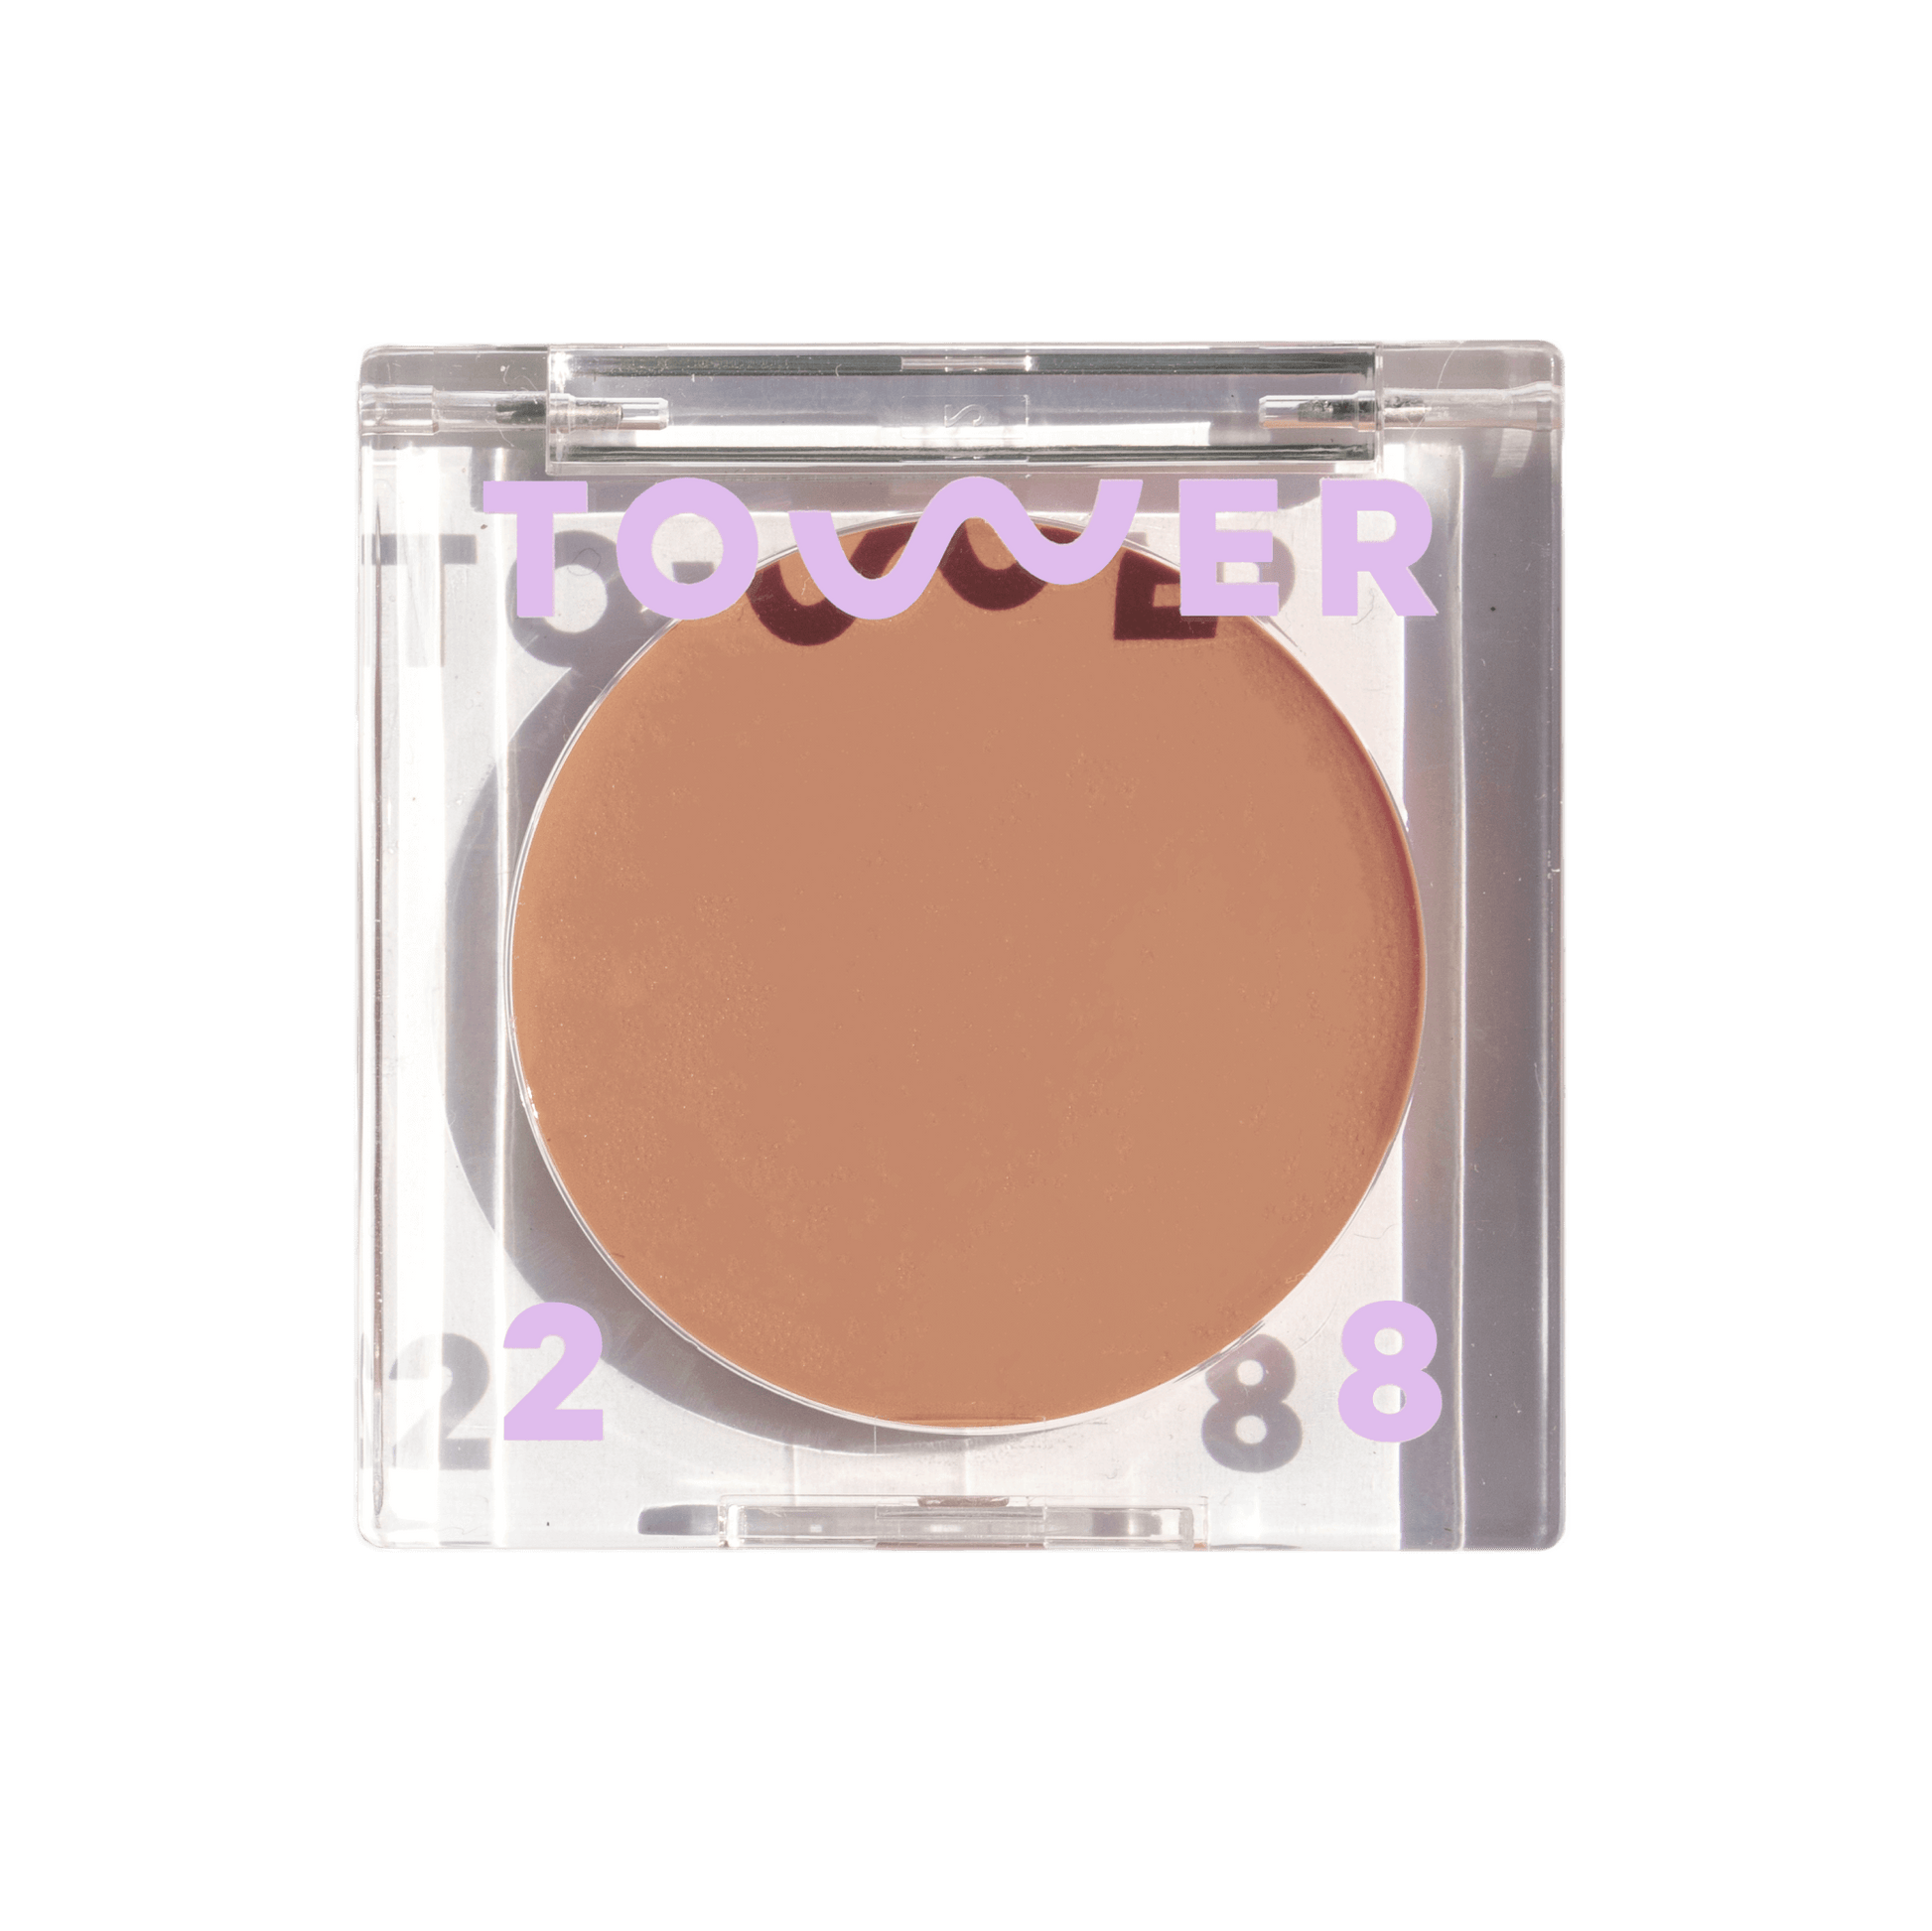 The Tower 28 Beauty Sculptino™ Cream Contour in the shade Broad